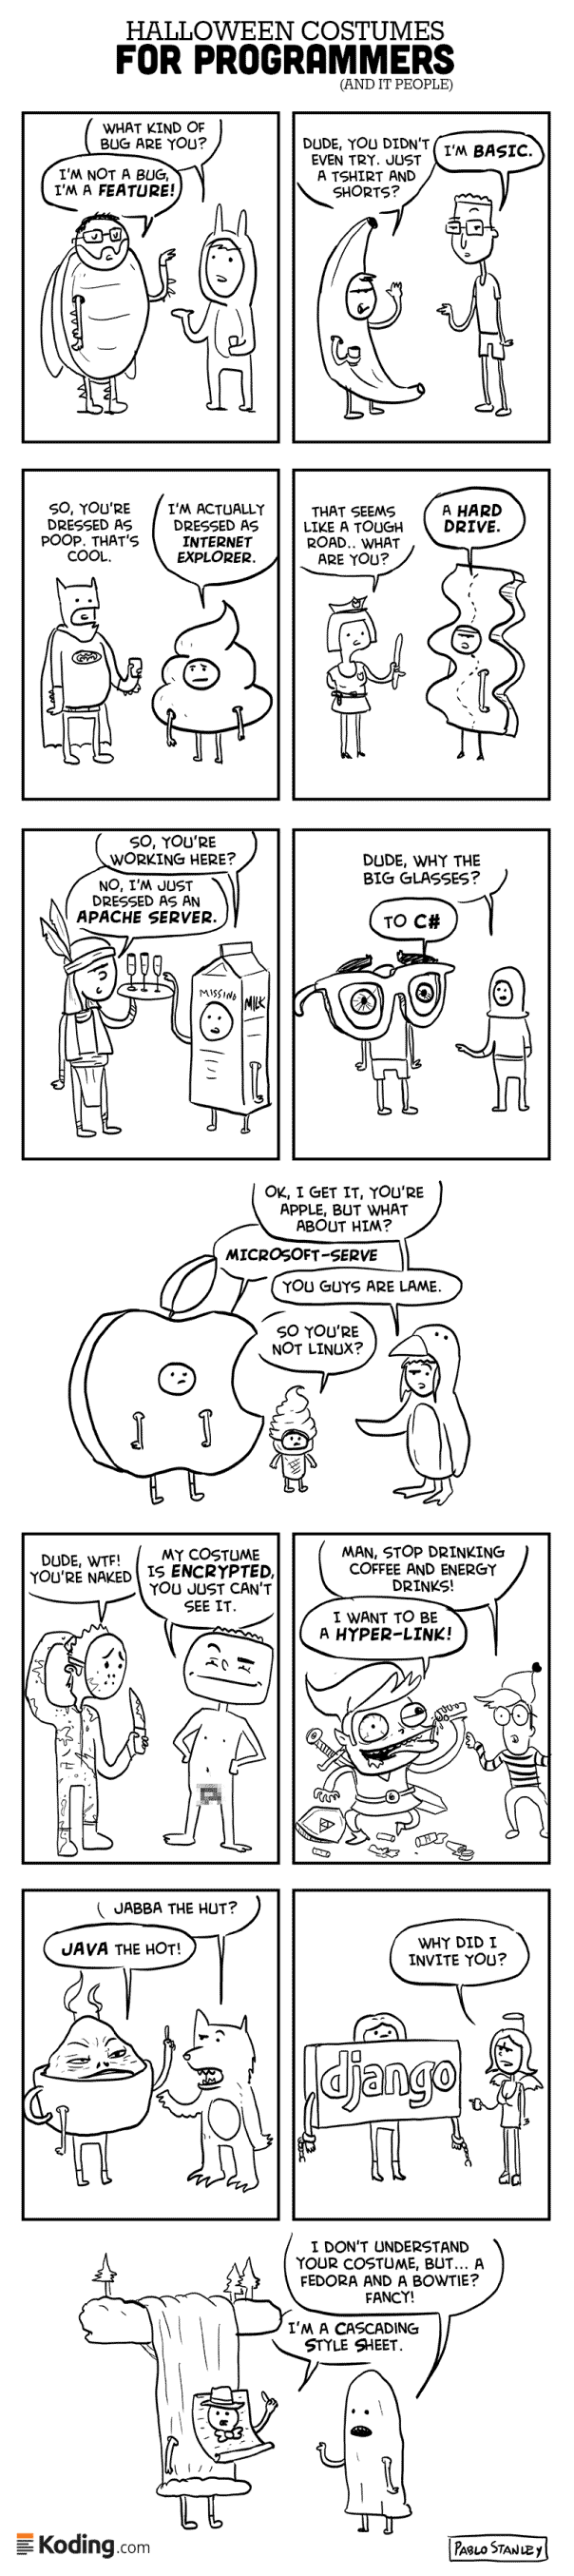 halloween costumes for programmers